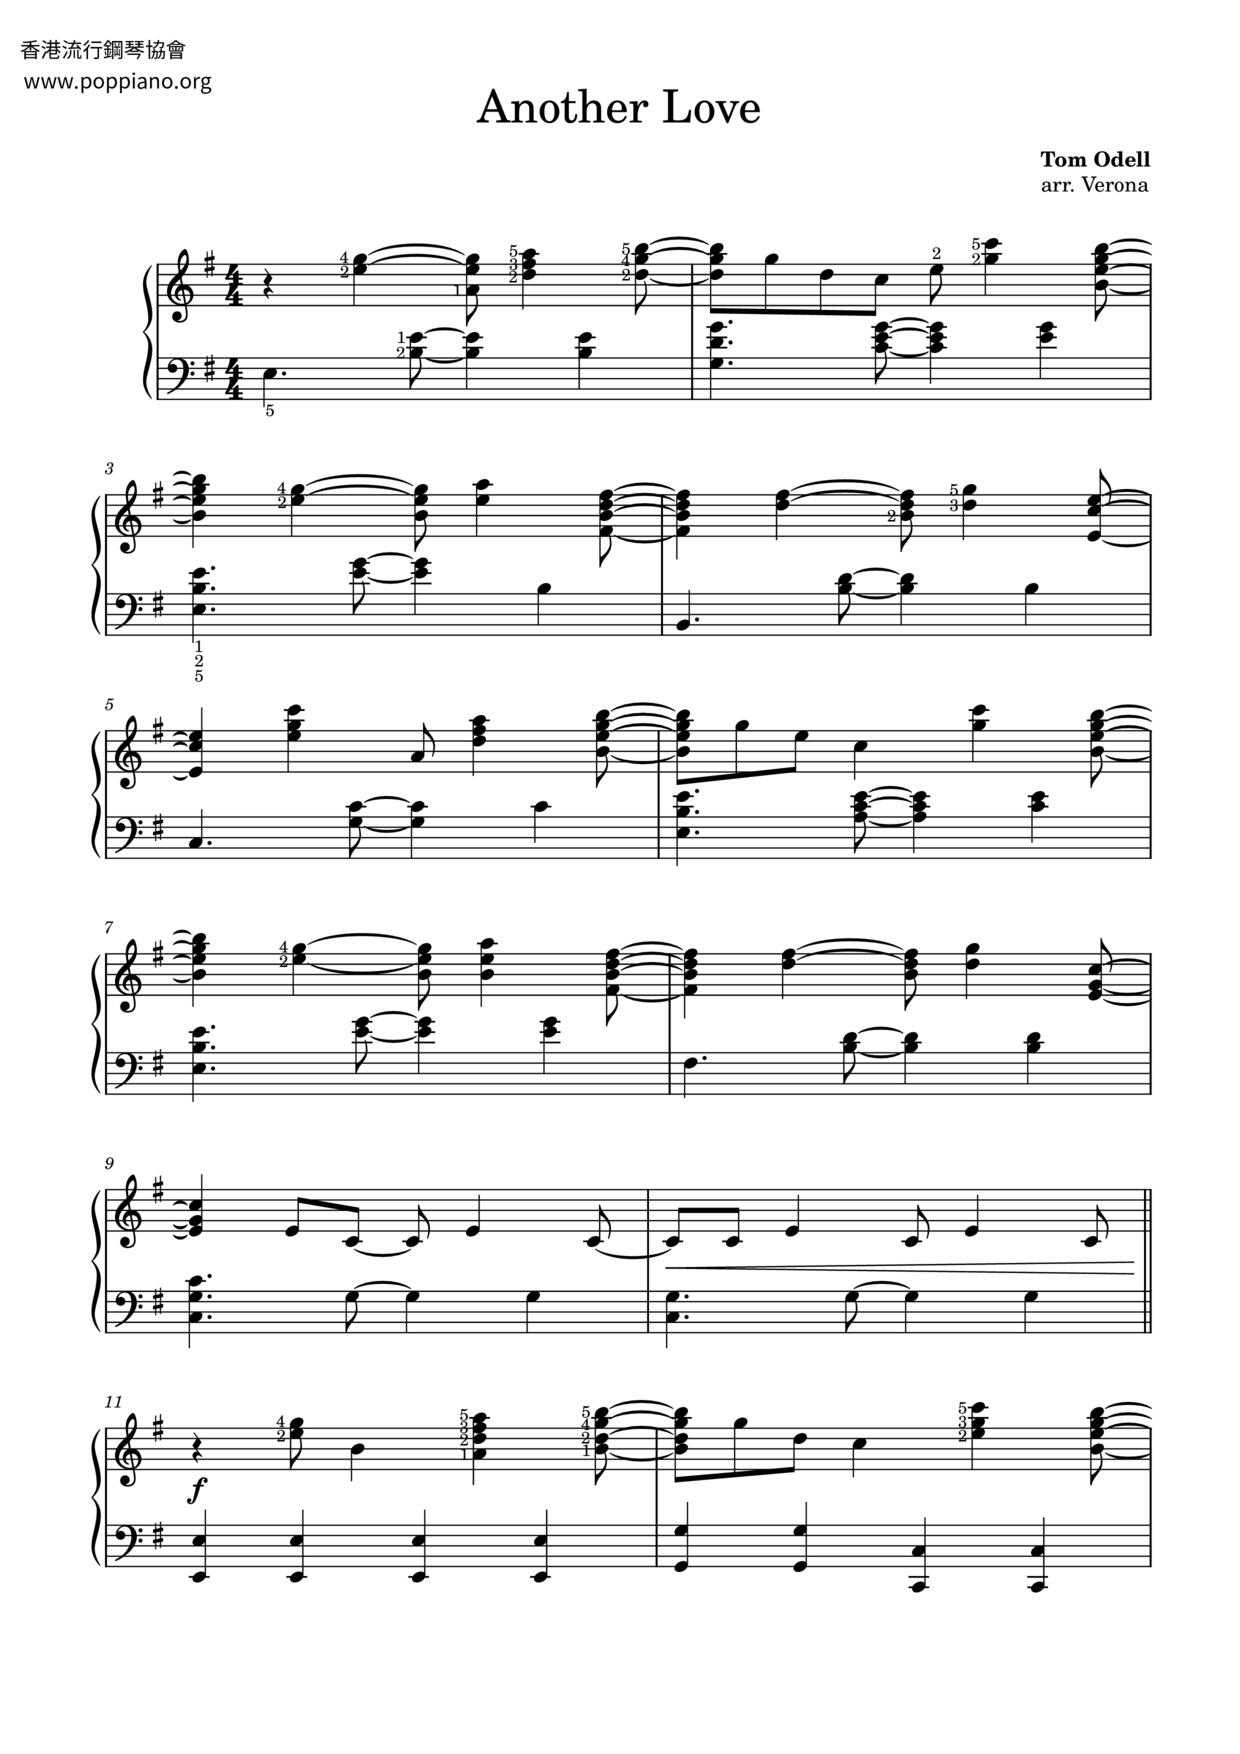 Another Love Sheet Music, Tom Odell